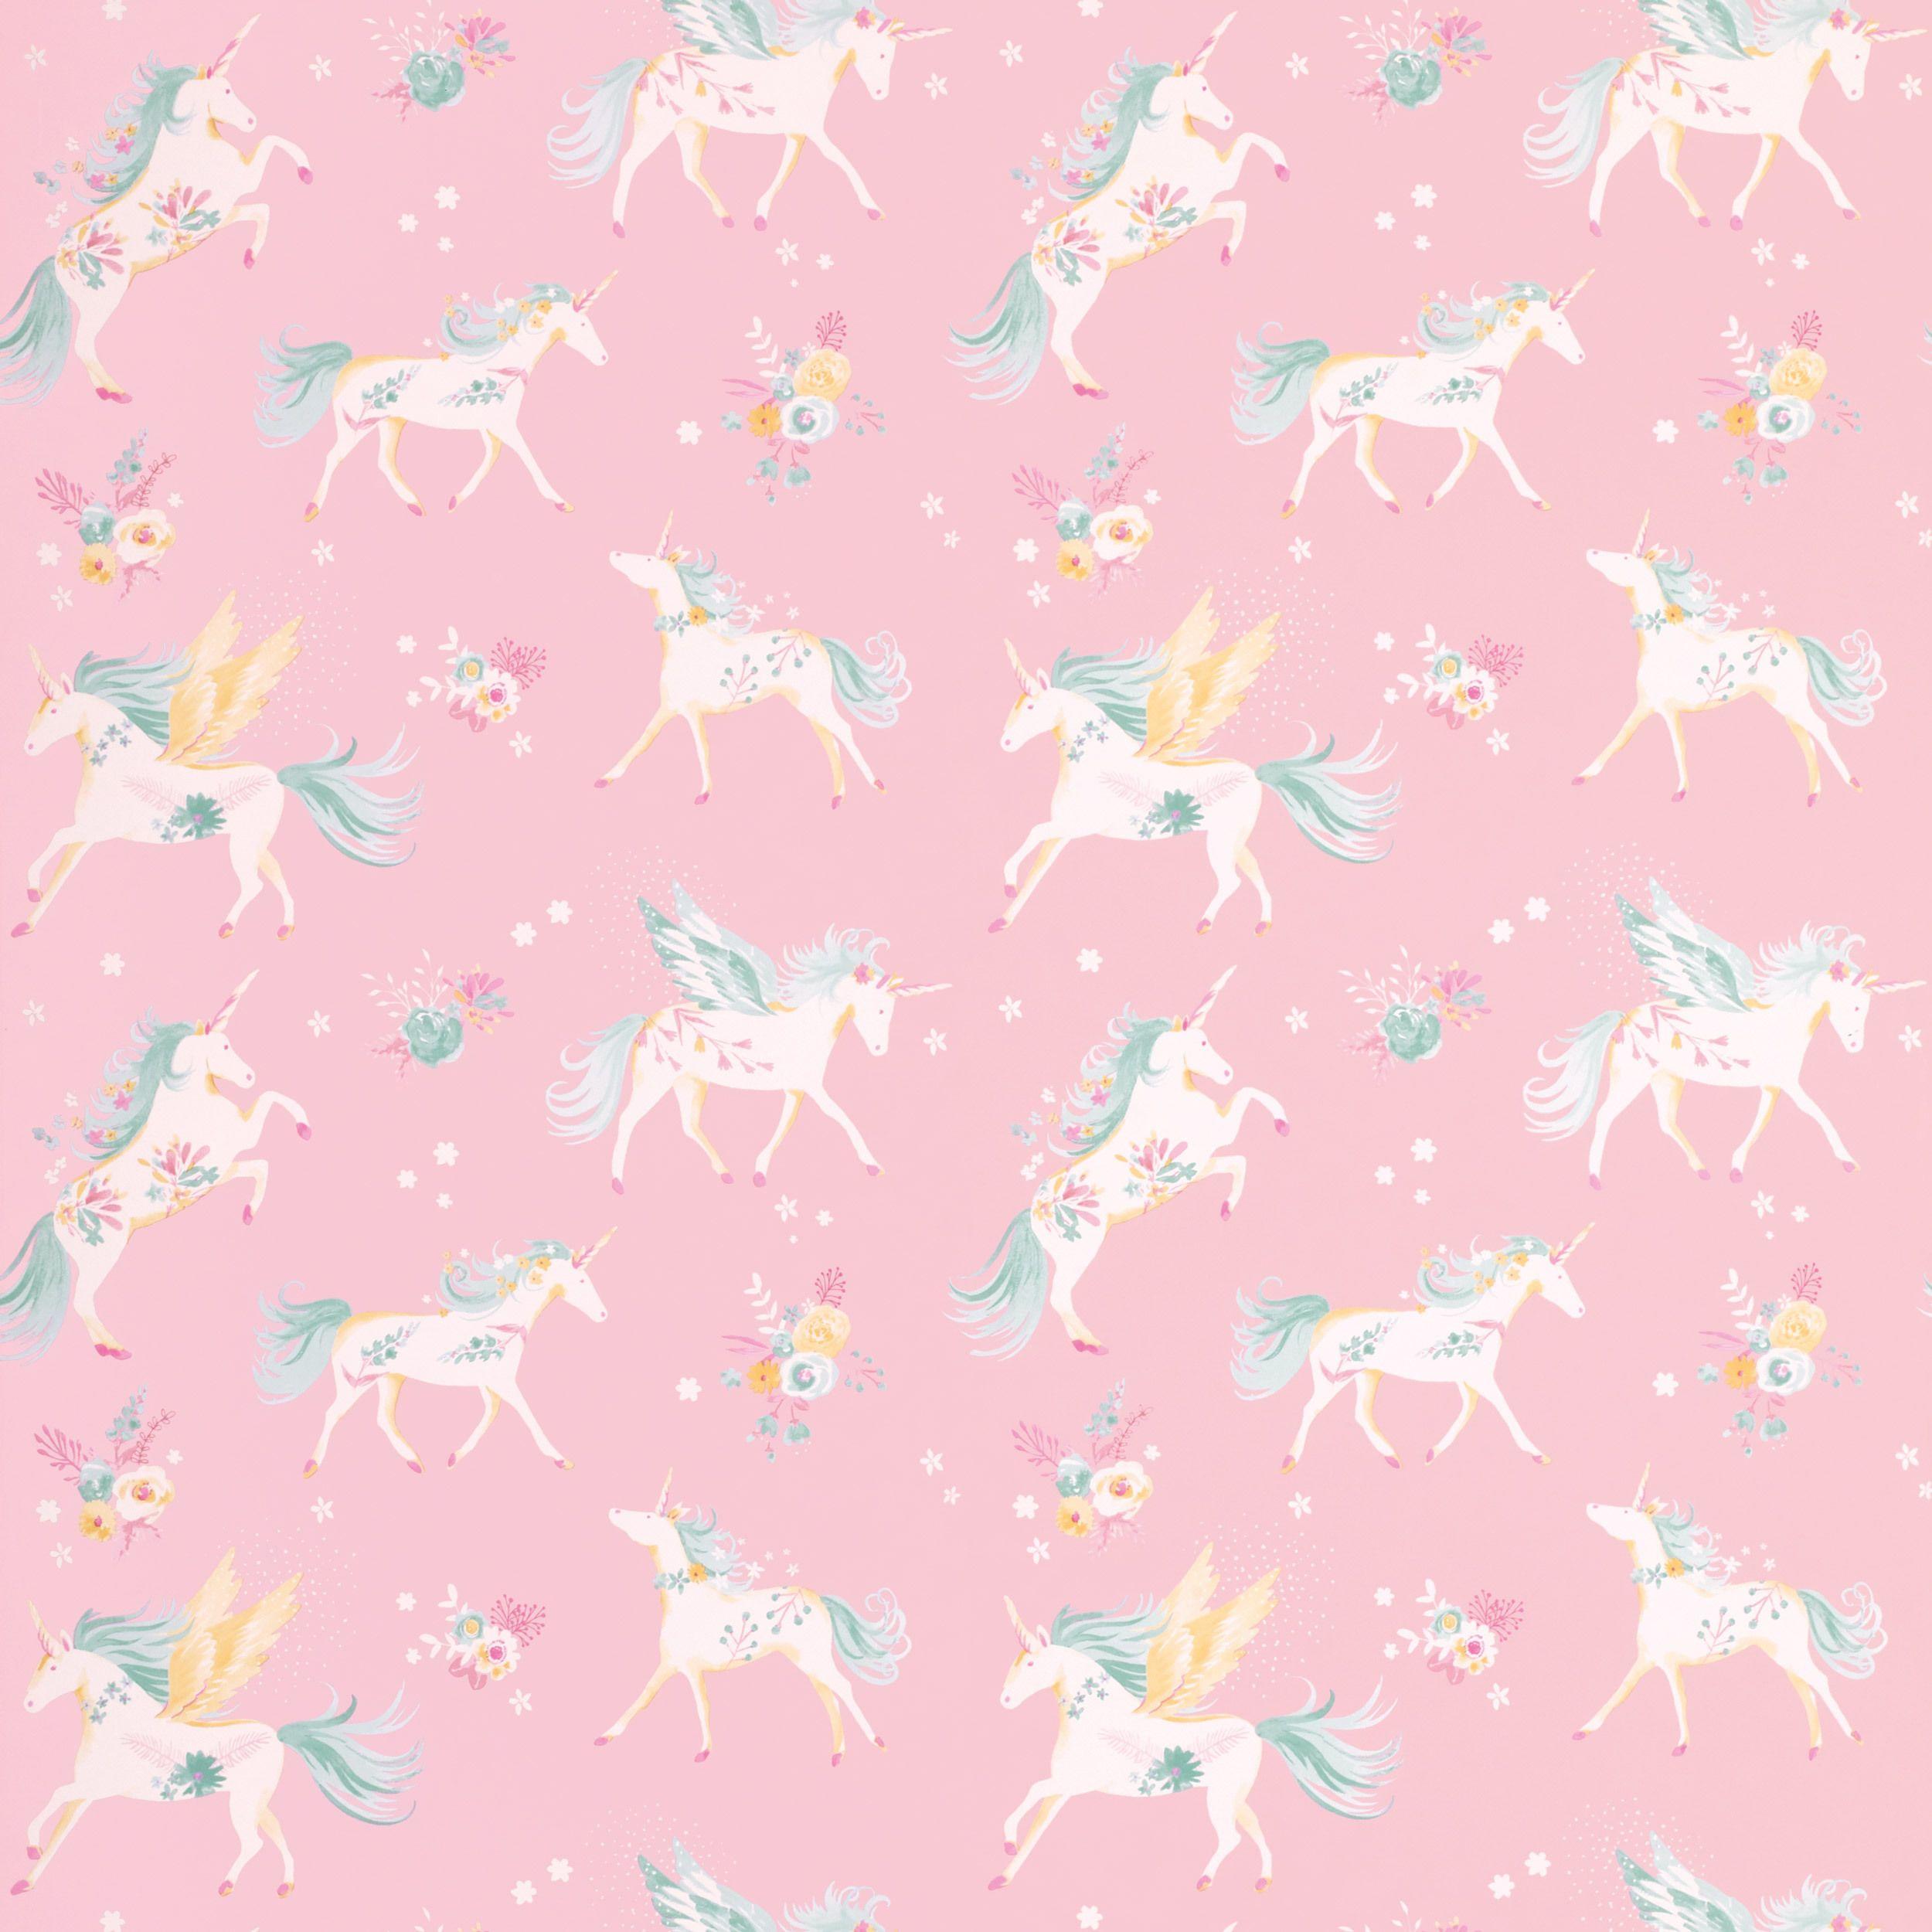 A pink background with white unicorns and flowers - Unicorn